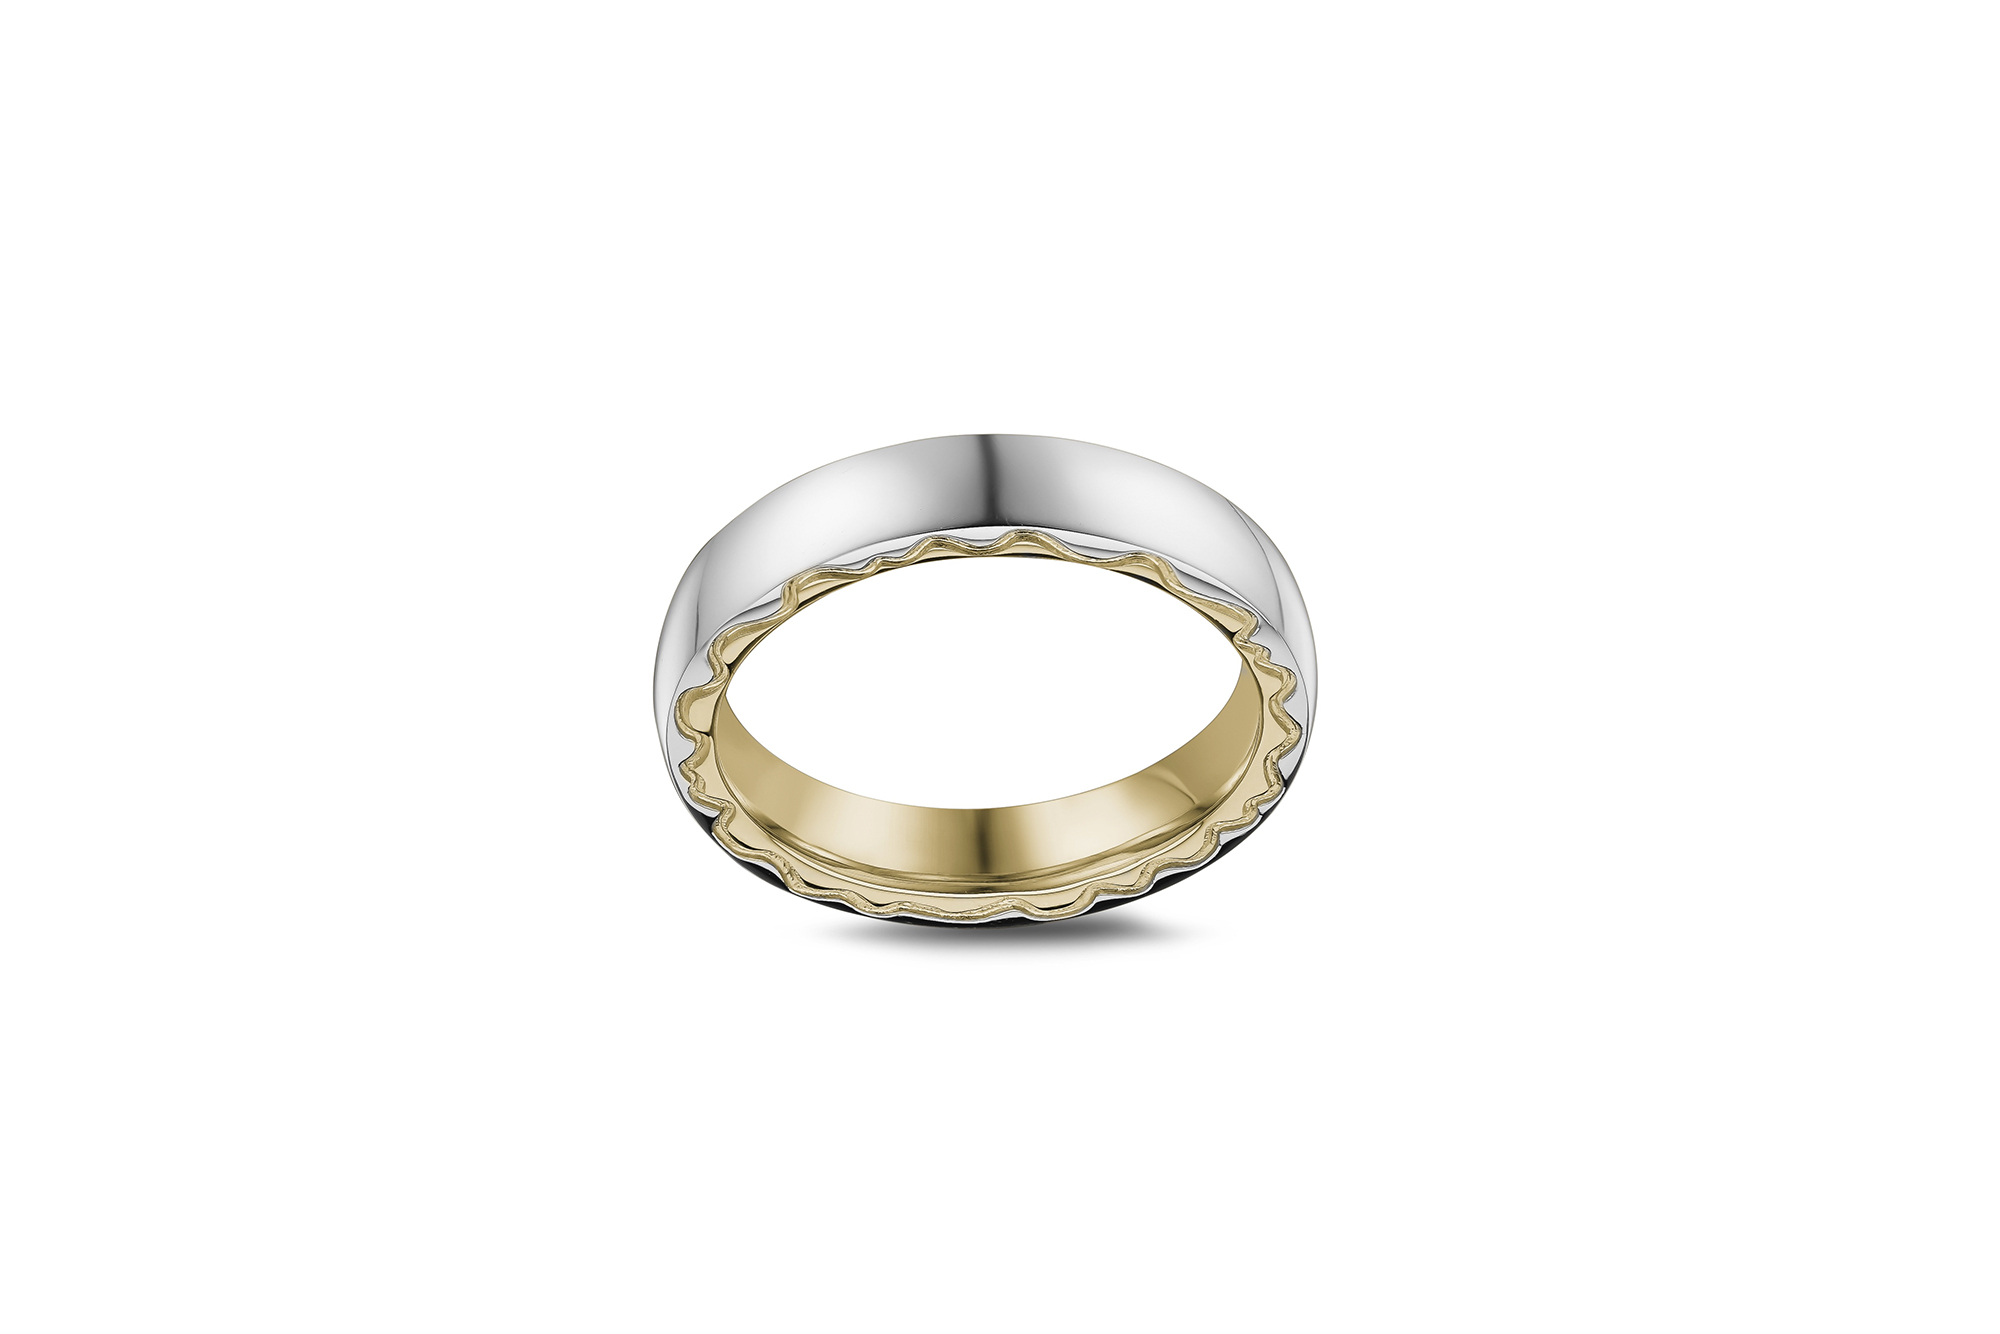 Joel Muller silver and gold ring